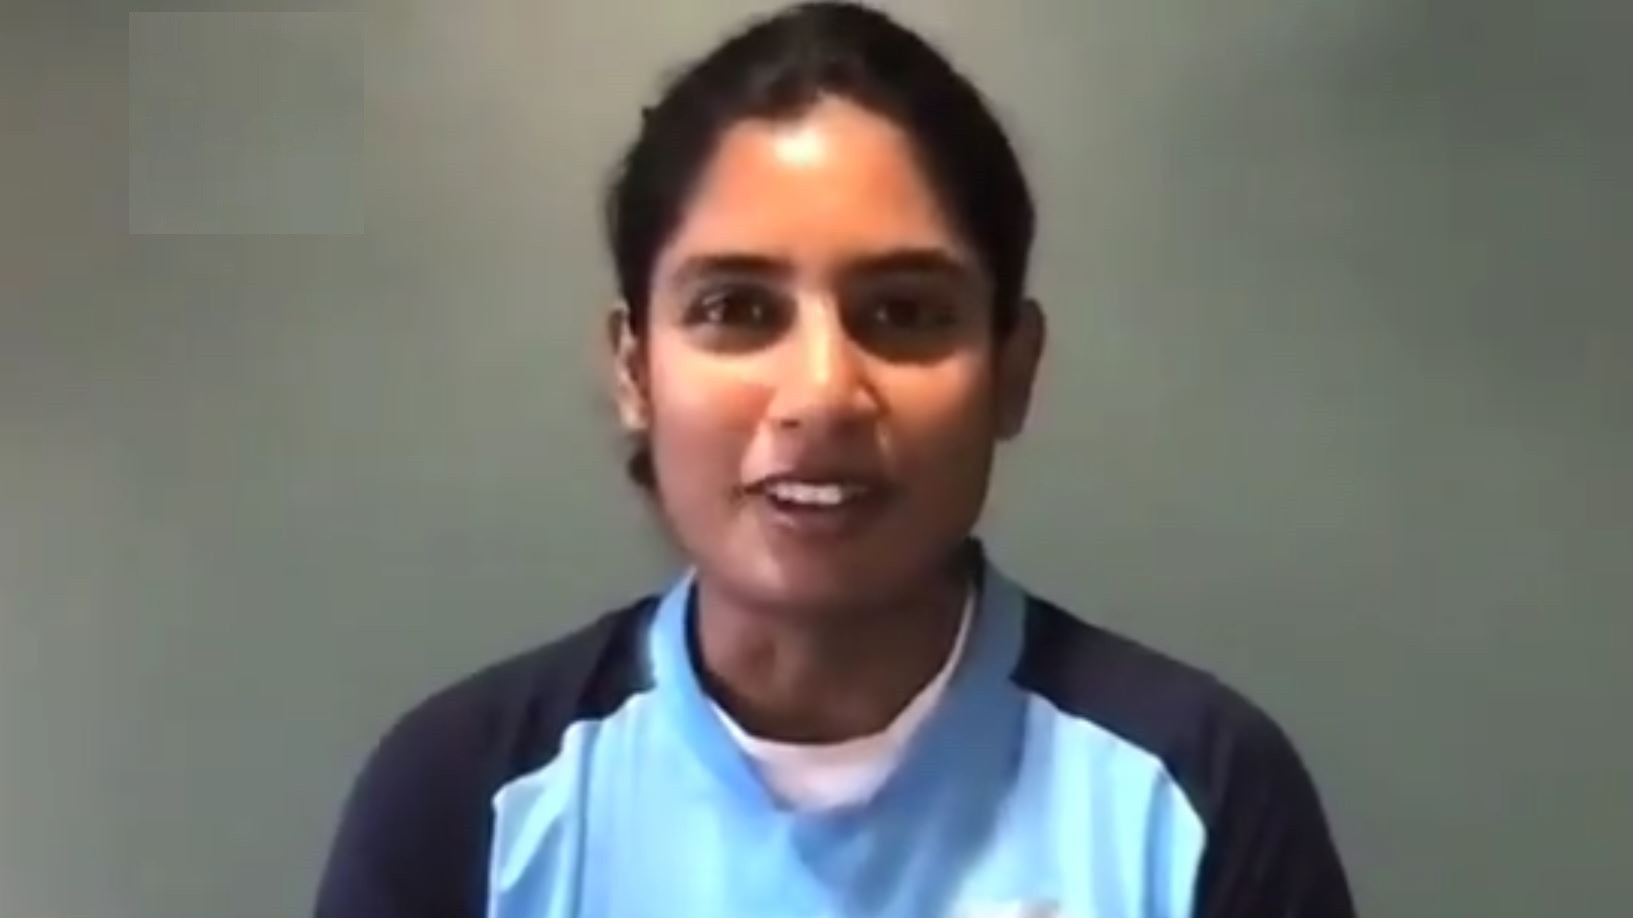 ENGW v INDW 2021: Mithali Raj says took other's advice to prepare for England Test; wants Tests in bilateral series